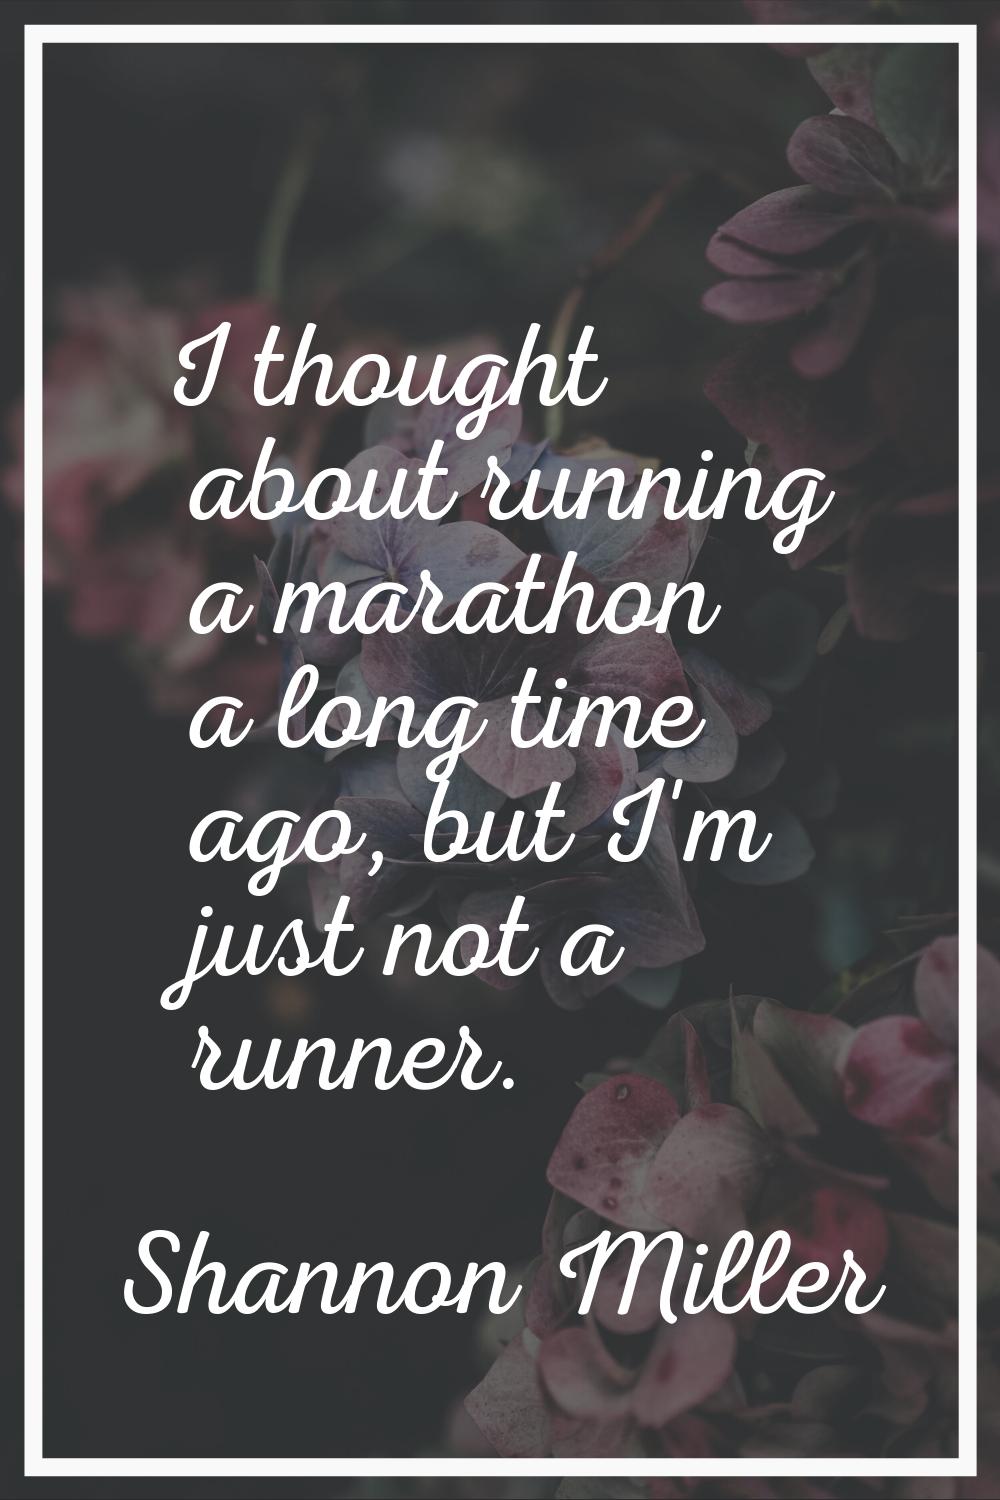 I thought about running a marathon a long time ago, but I'm just not a runner.